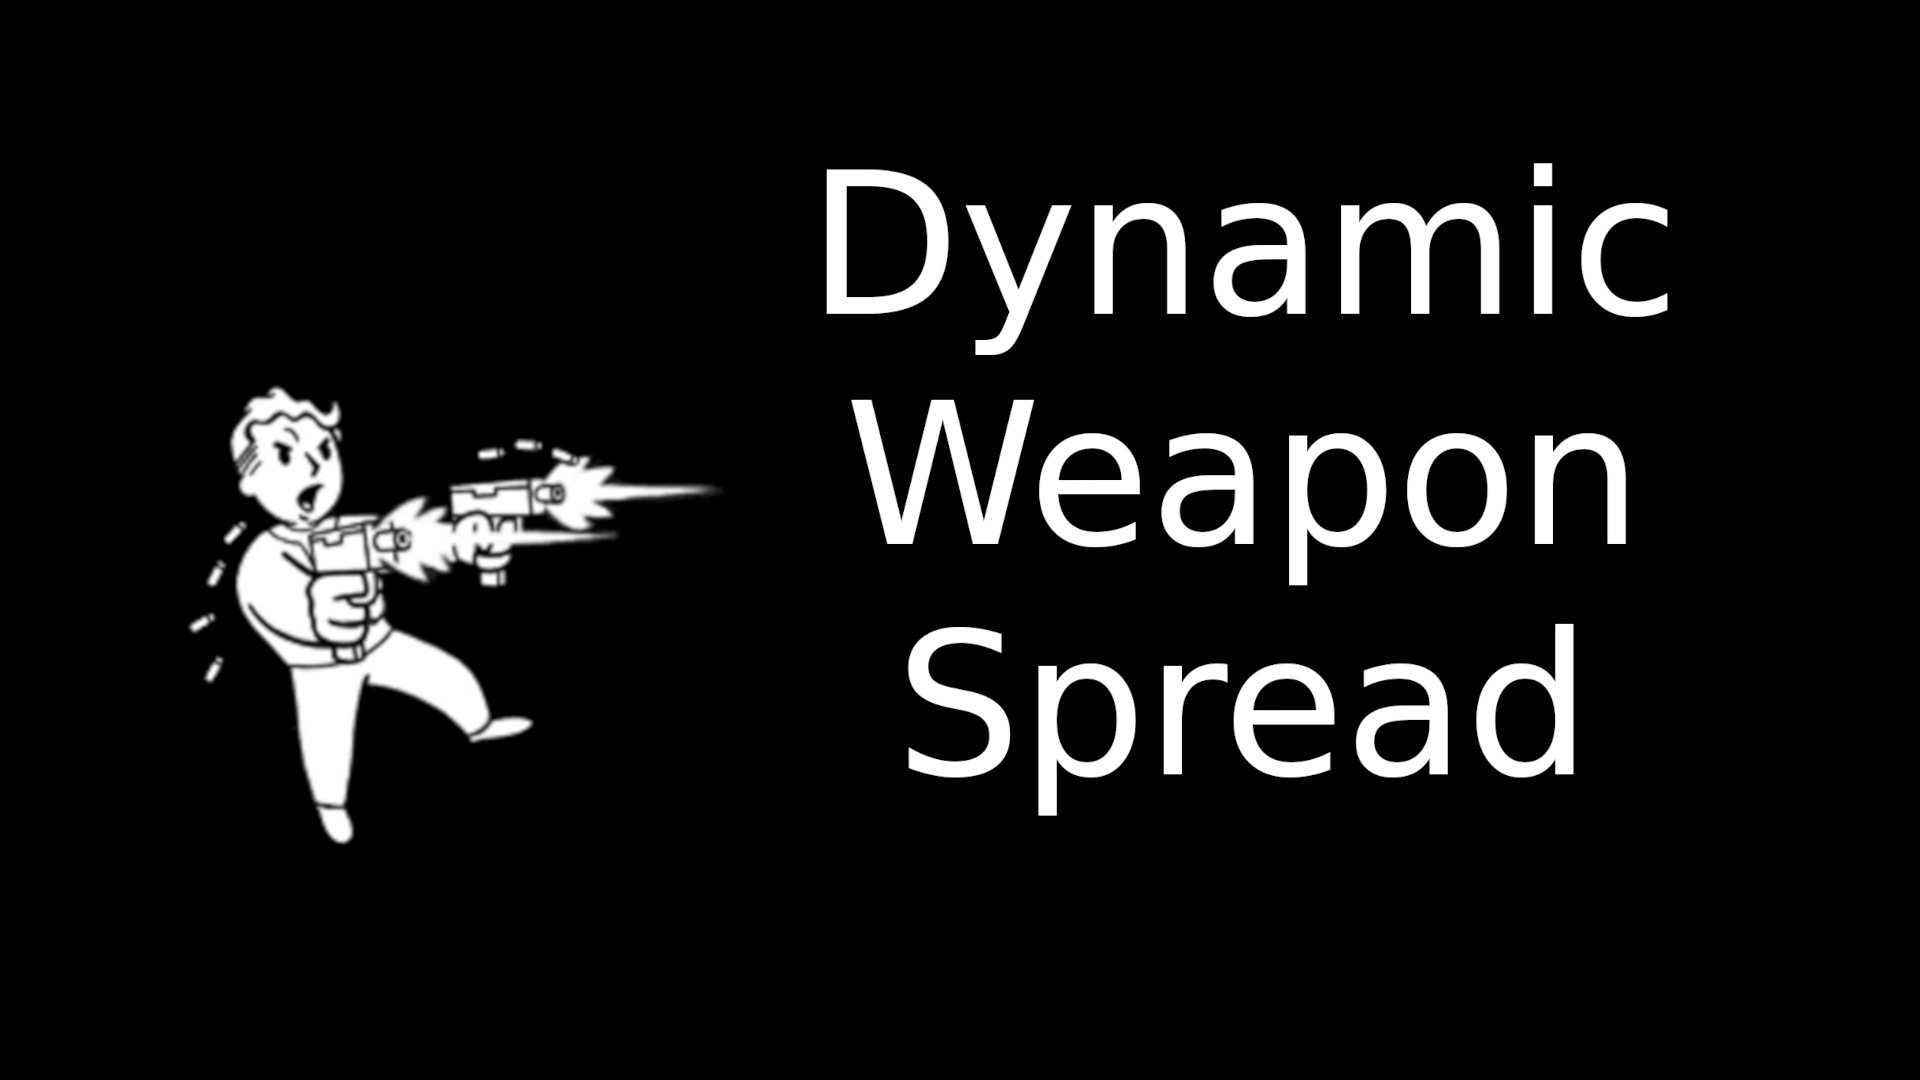 Weapon Spread